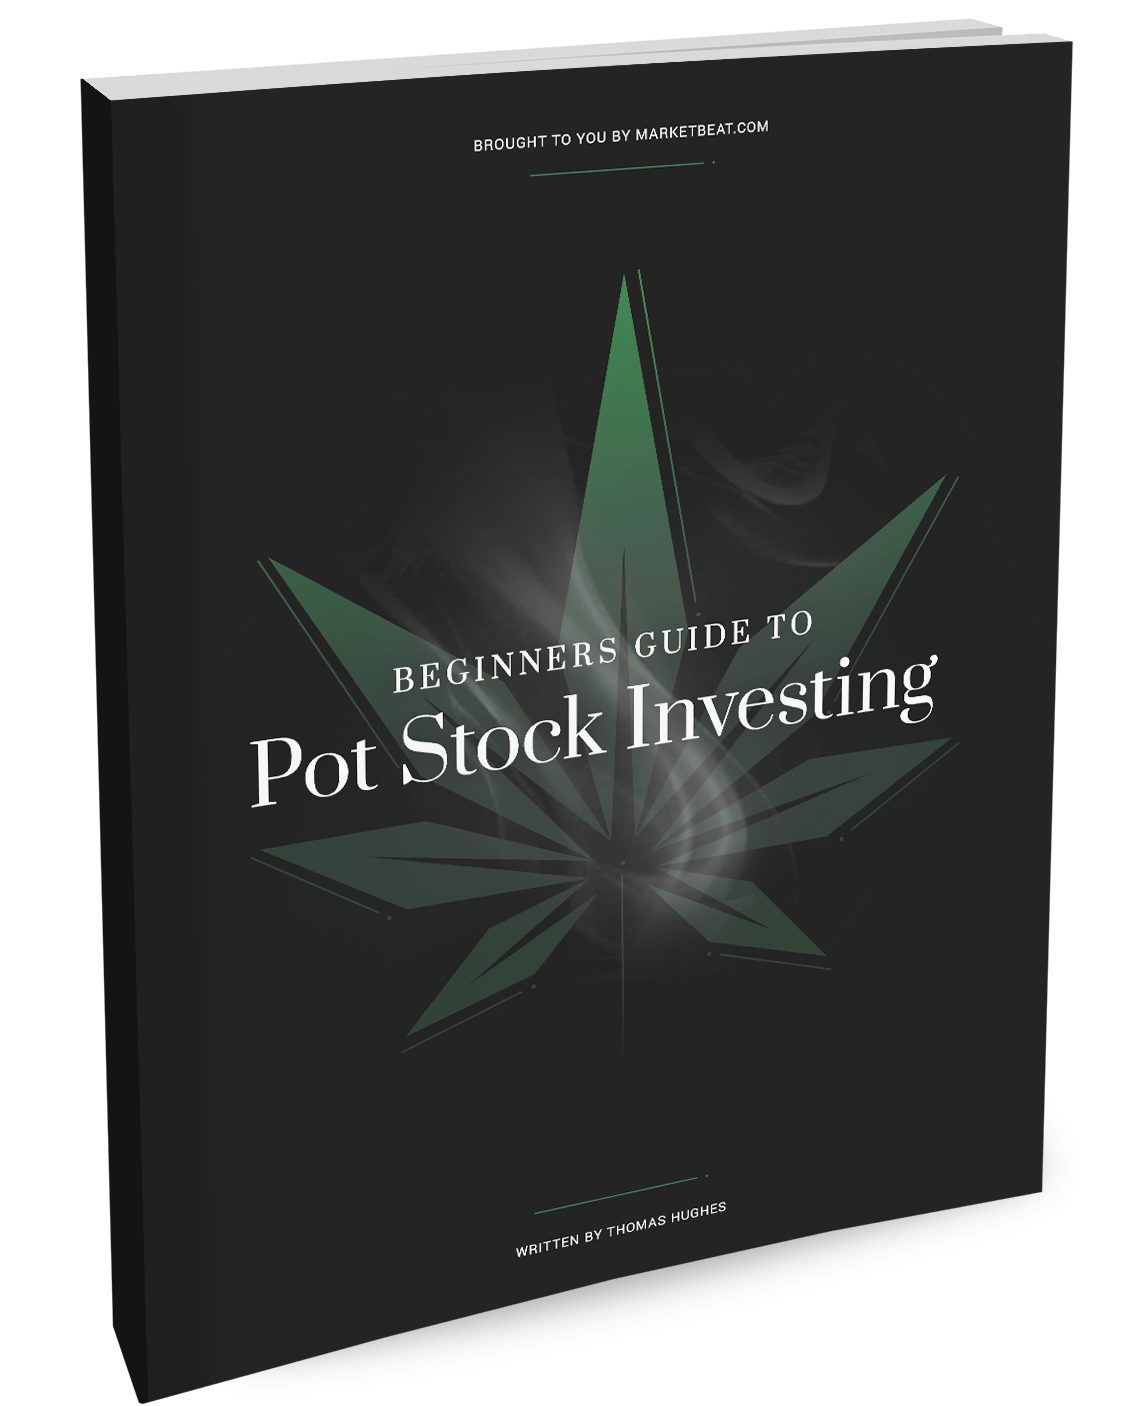 Beginner's Guide to Hedging Pot Stock Investing